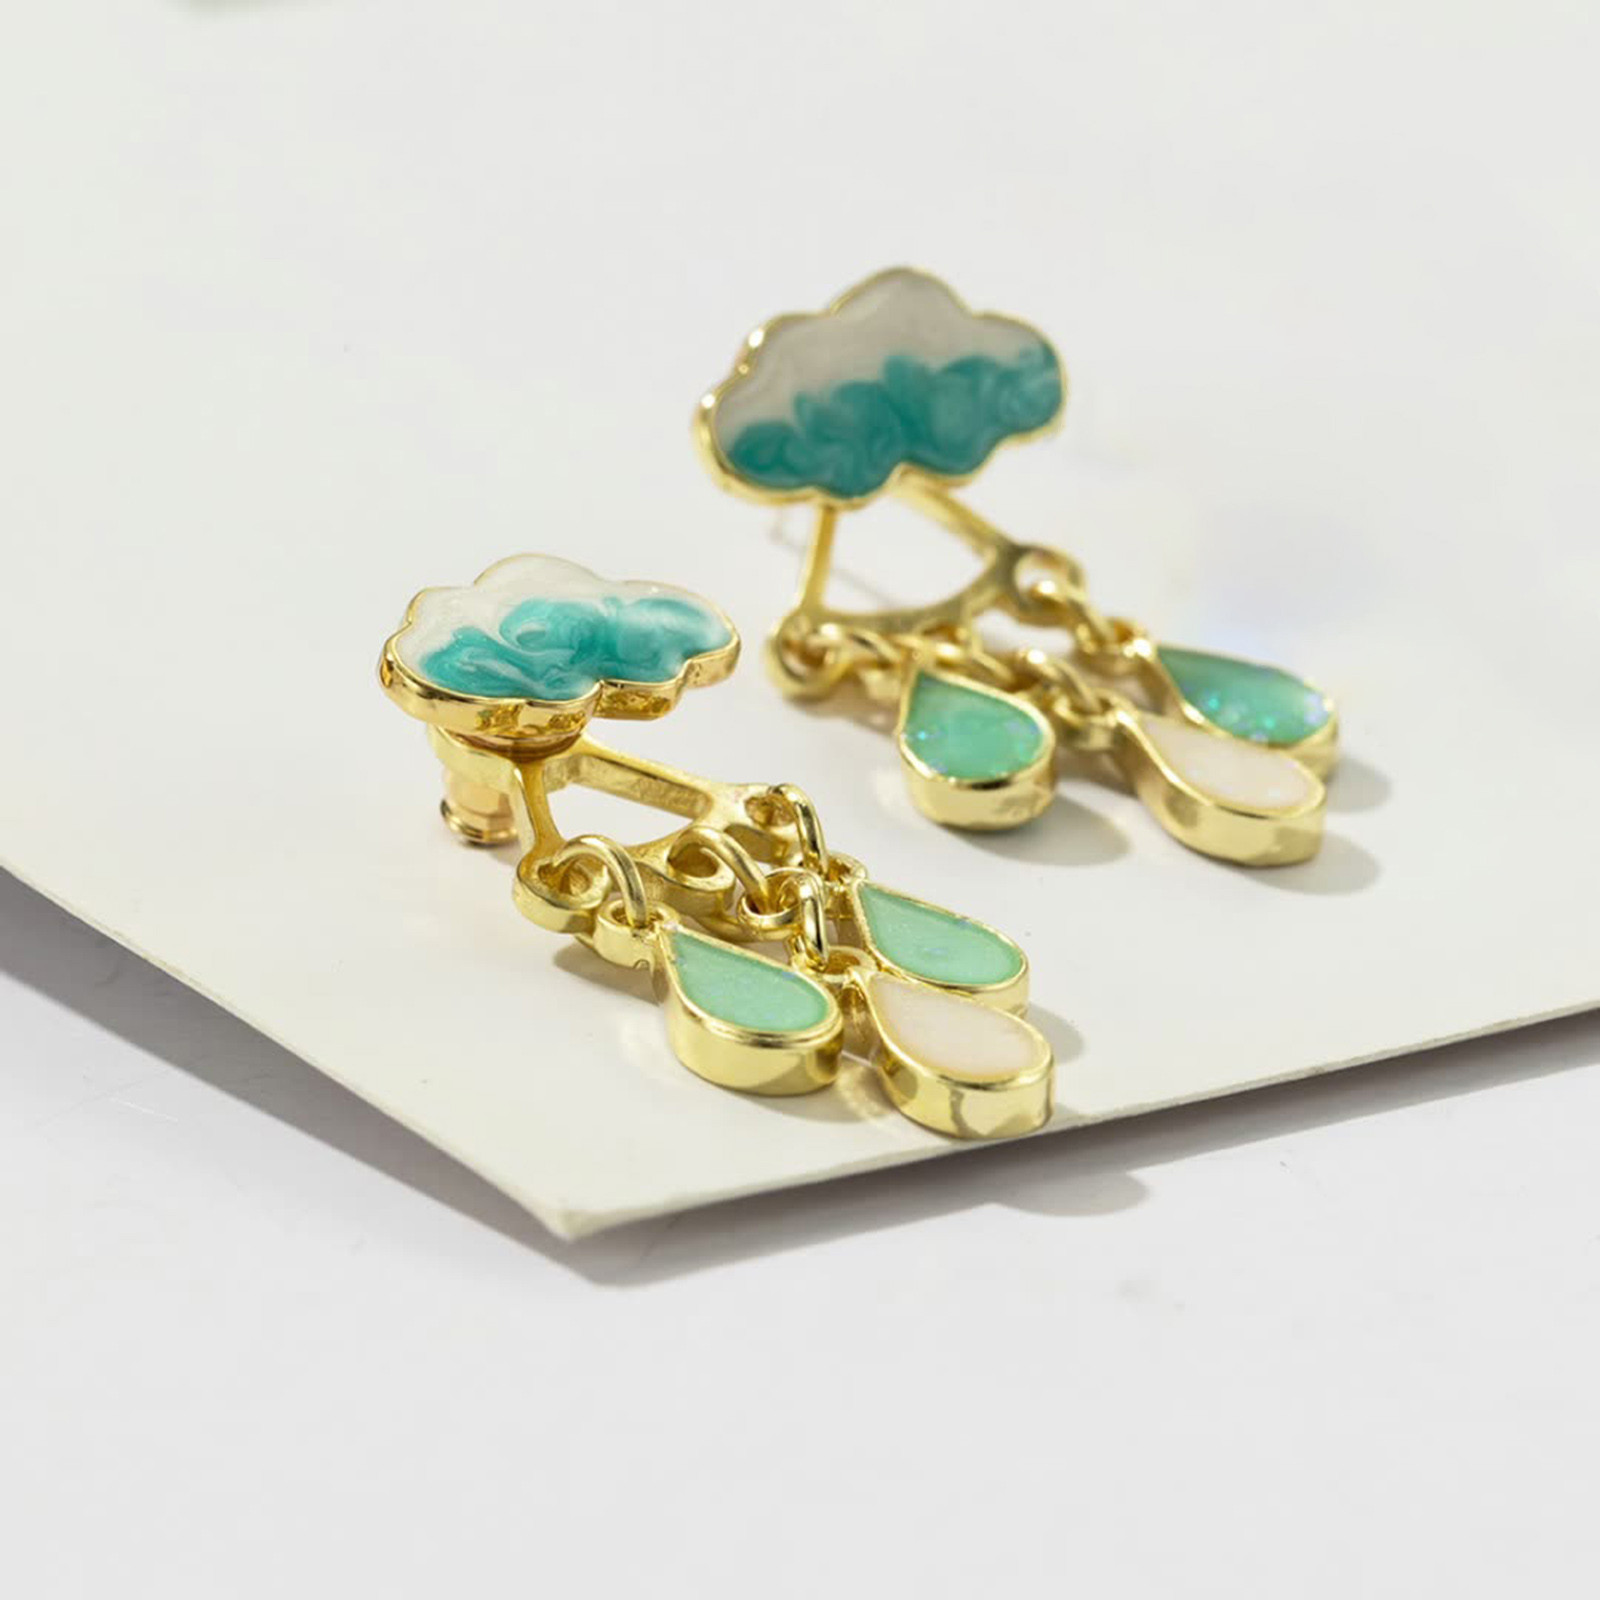 Kayannuo Christmas Clearance Rainy Day Cloud Earrings Cloud Rain Earrings Stud Earrings Advanced Cute Fresh Water Drop Earrings Jewelry Gifts For Women - image 2 of 6